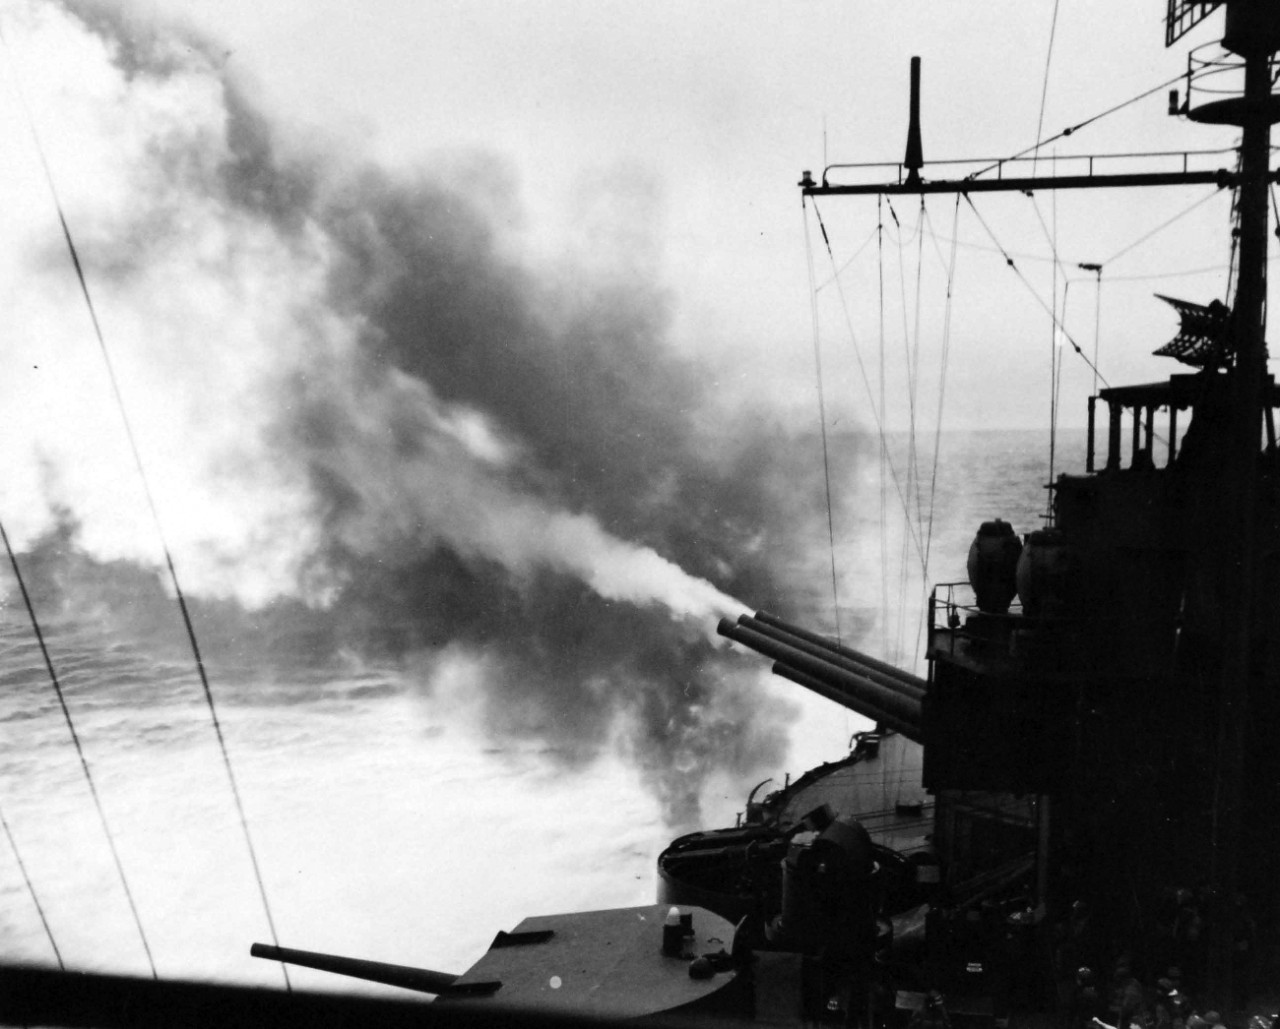 80-G-57051:  Aleutian Island Campaign, June 1942-August 1943. Battle of Attu, May 11-29, 1943.      USS Pennsylvania (BB 38), main batteries of the 14” guns during bombardment of Attu Island, Alaska, May 11, 1943. This bombardment lasted nearly three hours.   U.S. Navy Photograph, now in the collections of the National Archives.  (2017/05/02).